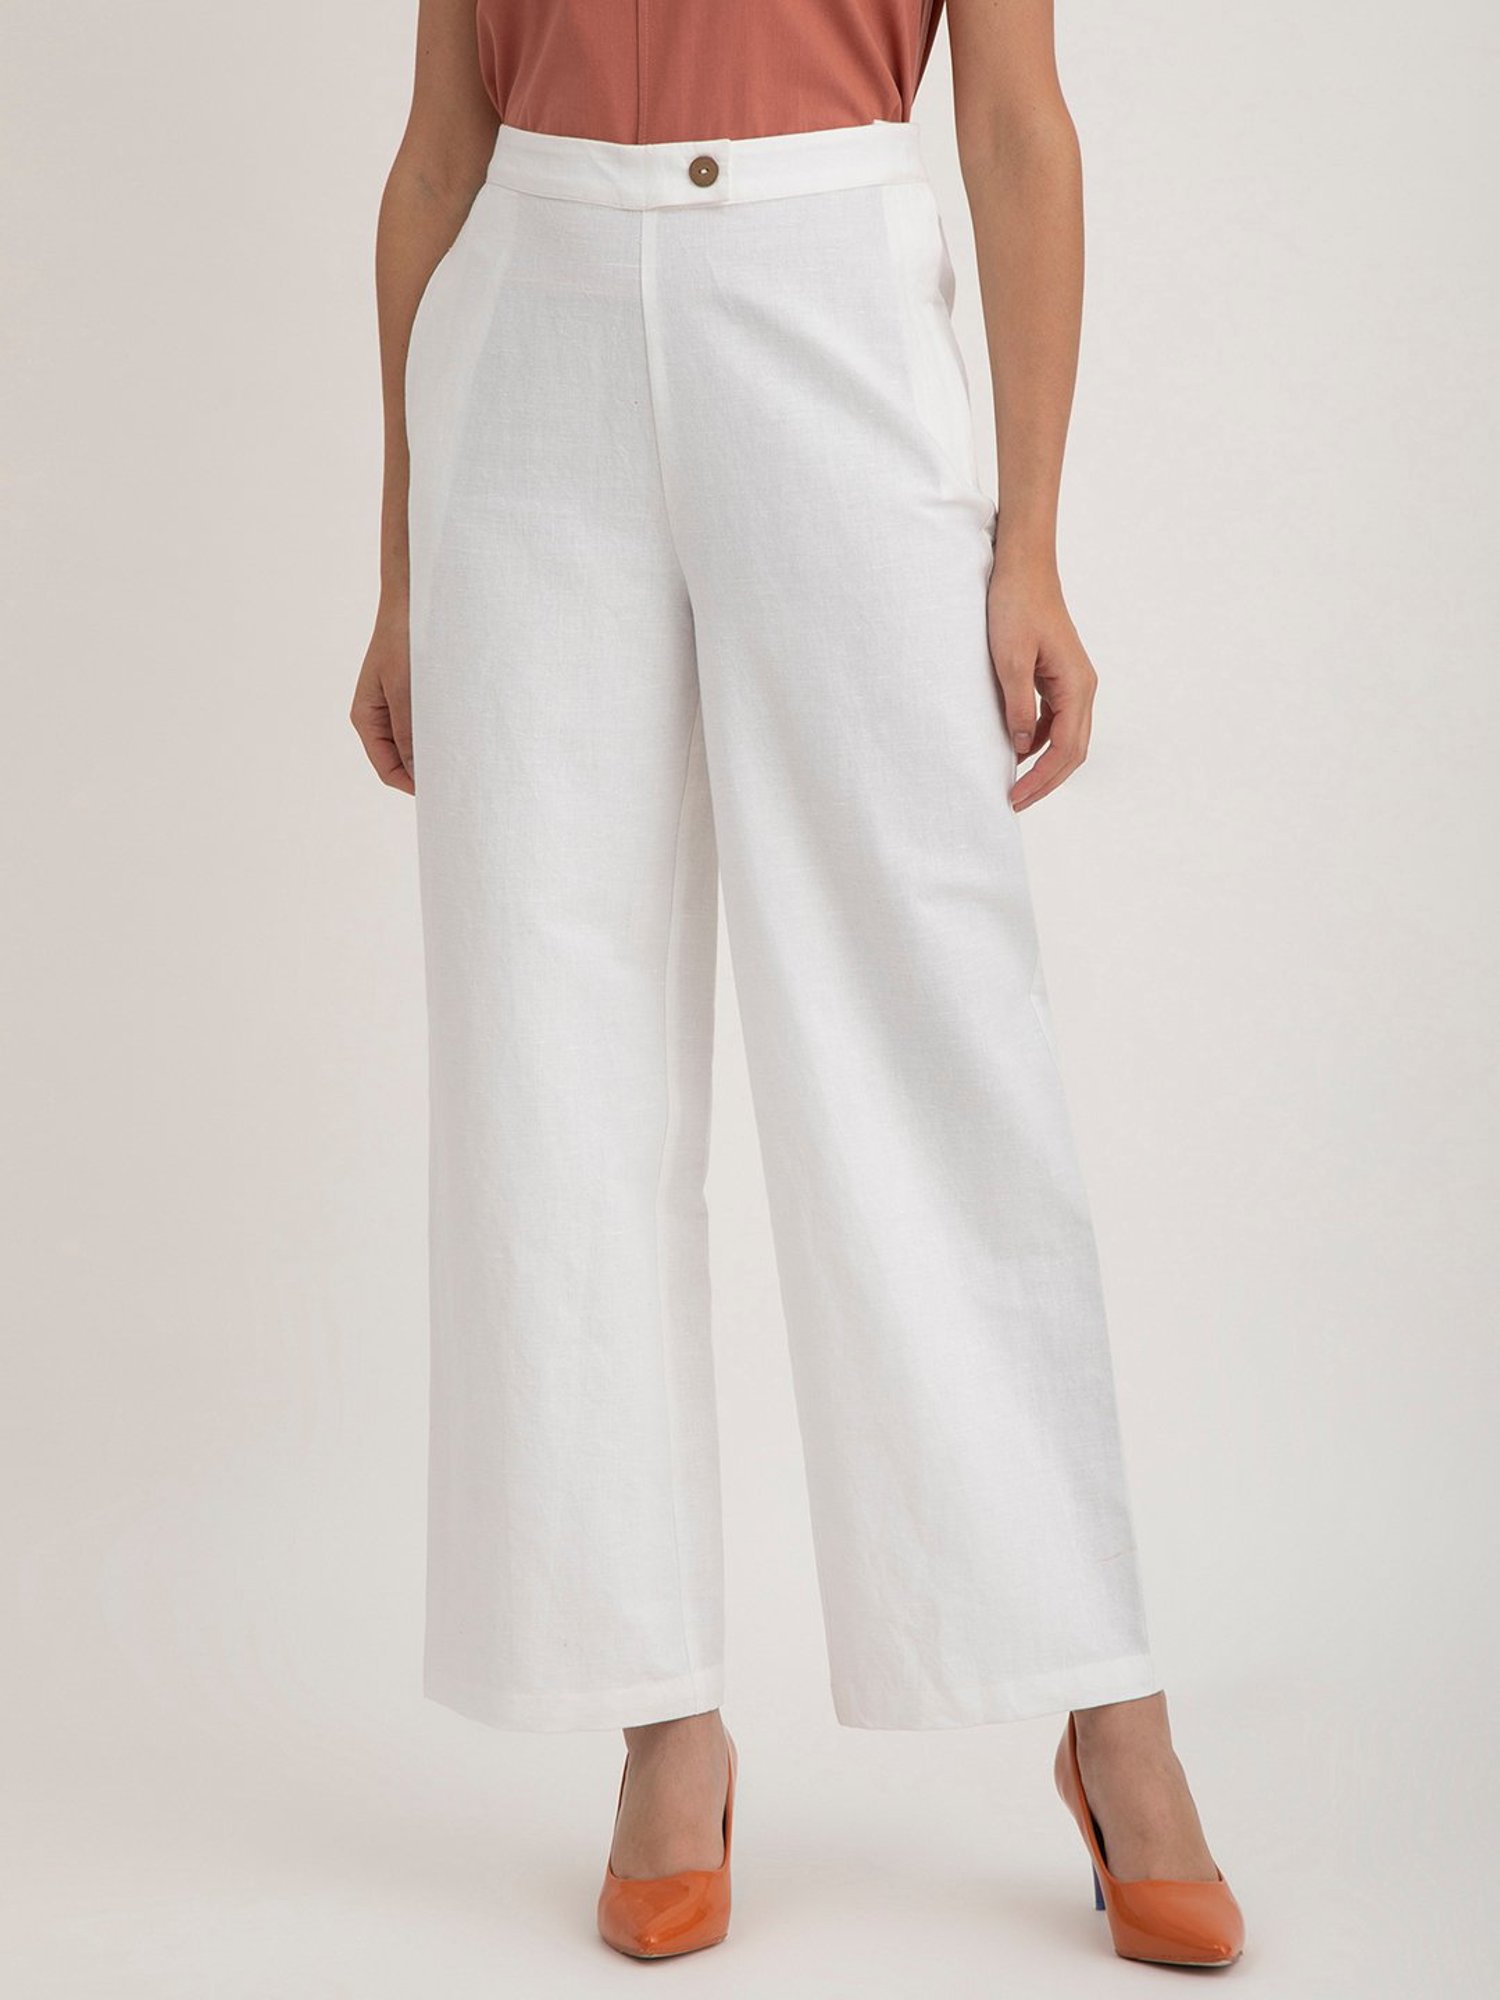 W Pants  Buy W Solid White Rayon Parallel Pants With Pleats Online   Nykaa Fashion